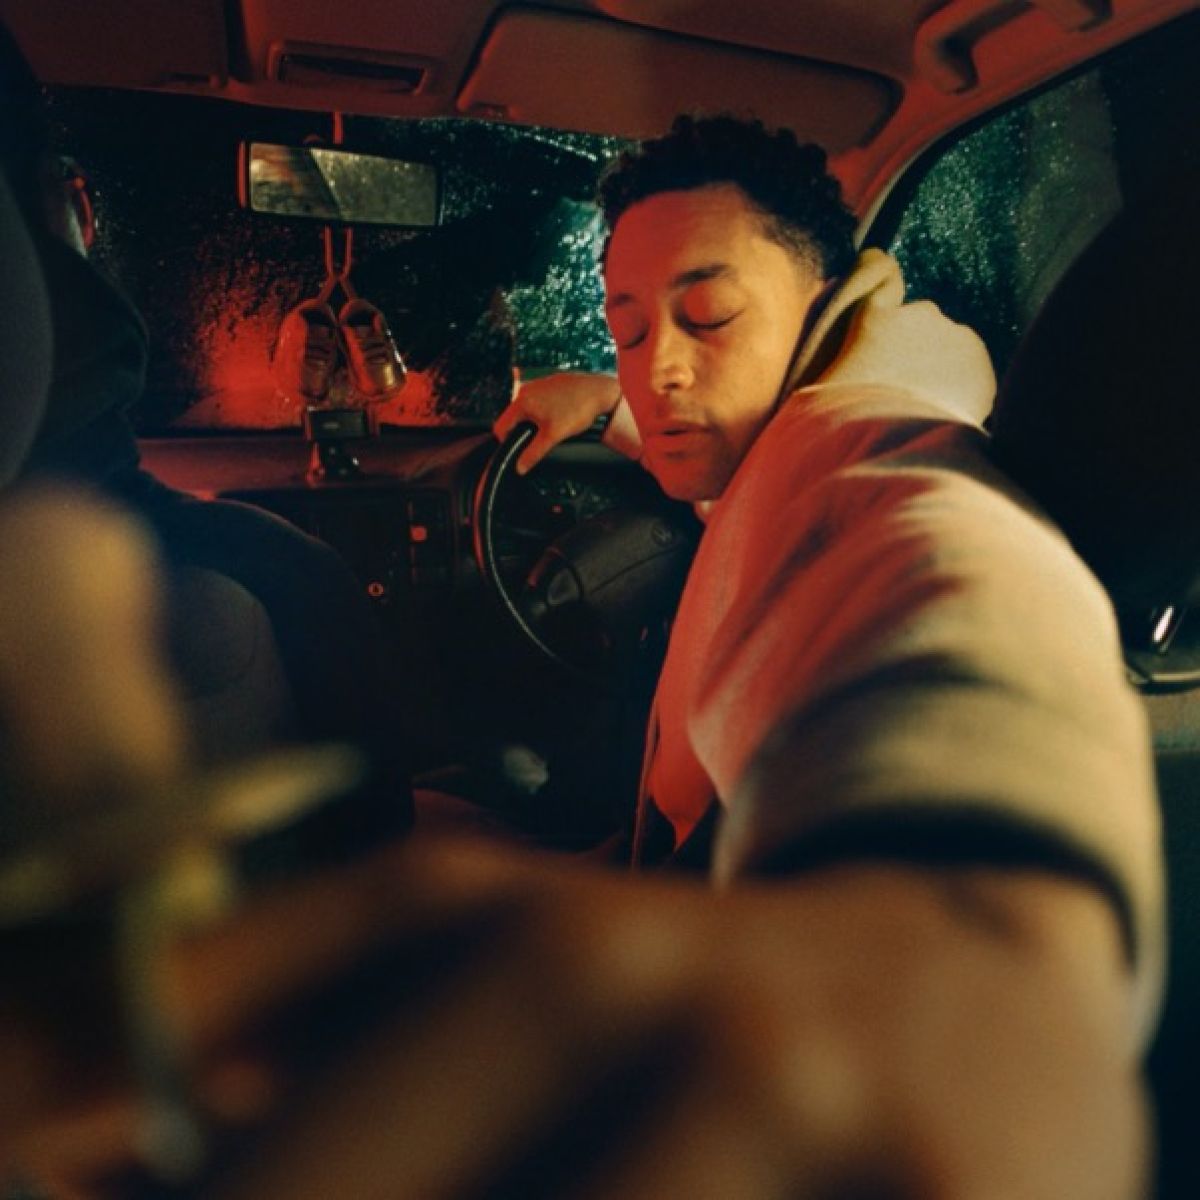 Loyle Carner’s ‘hugo’ inspires us to reflect, to relate, and to take action